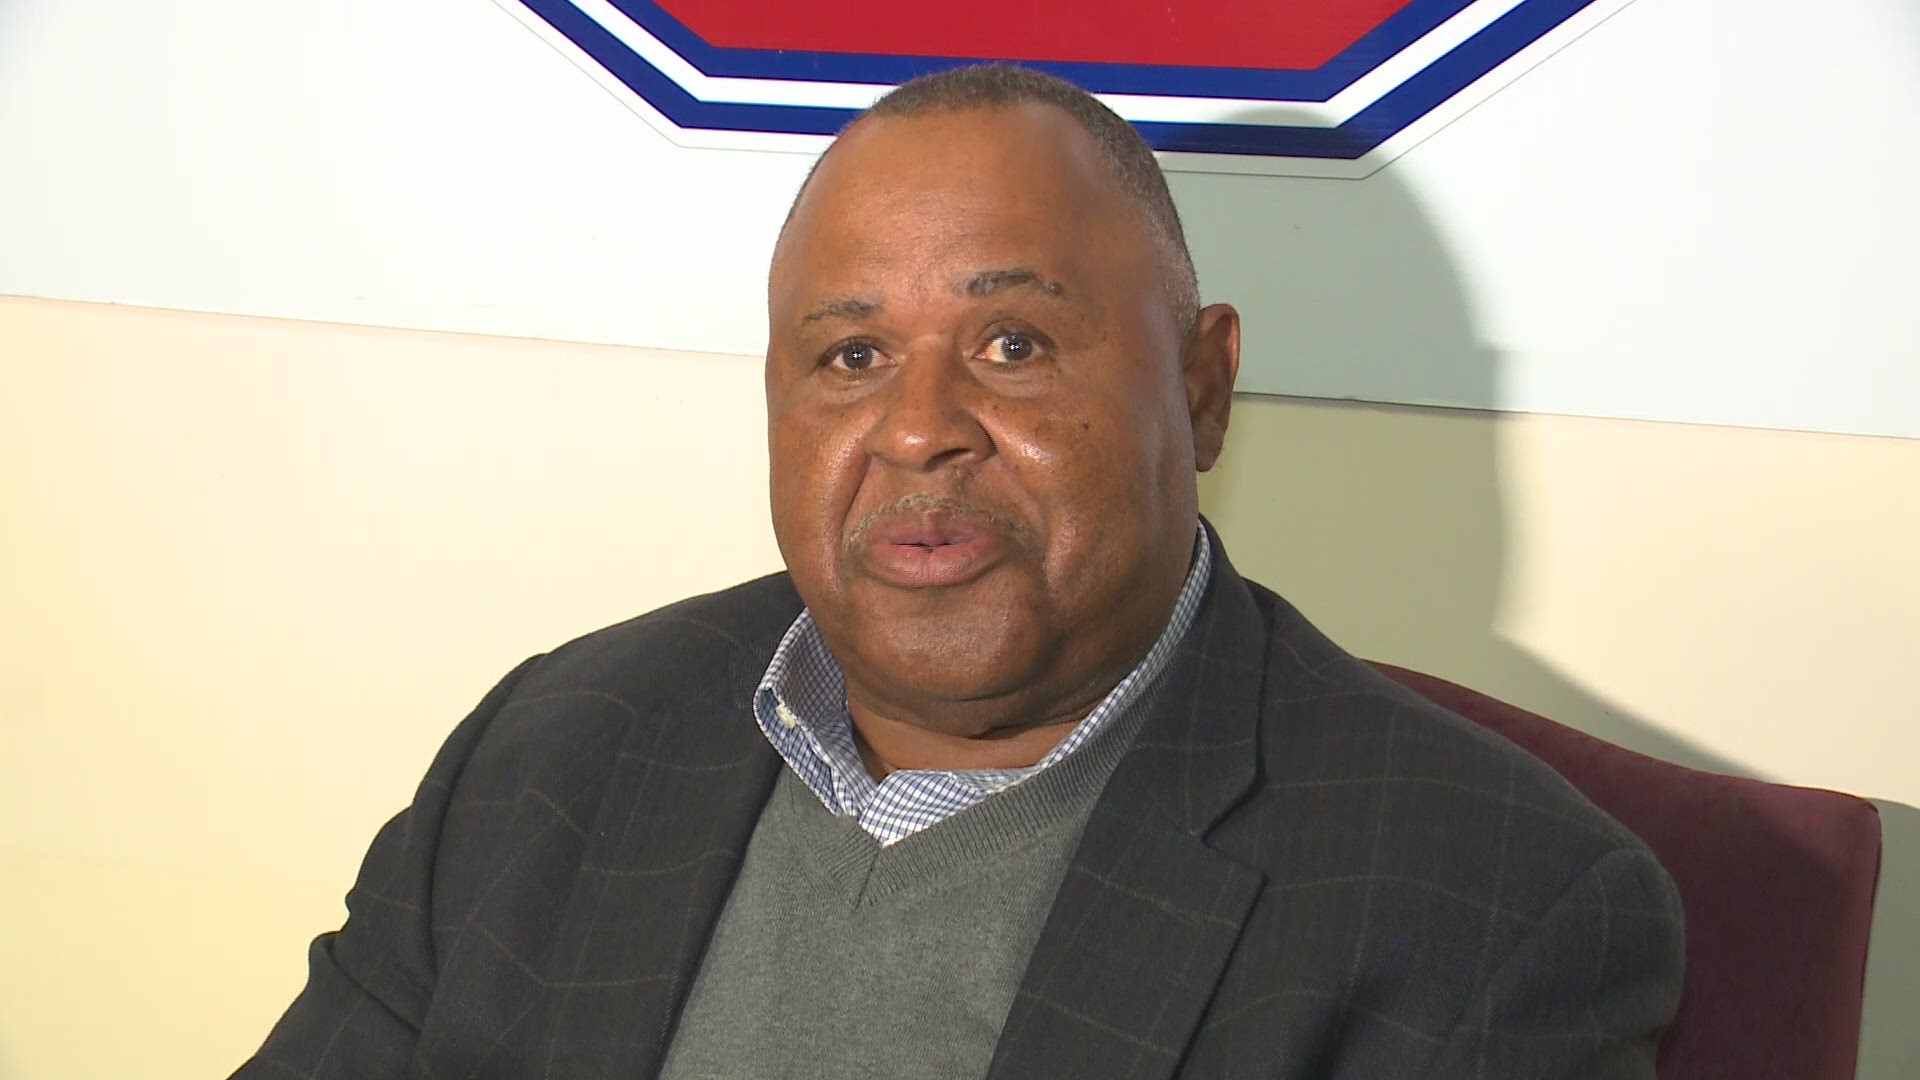 South Carolina State head football coach Buddy Pough met the media Wednesday afternoon where he talked about where things stand in terms of him possibly returning to the sidelines in 2019.